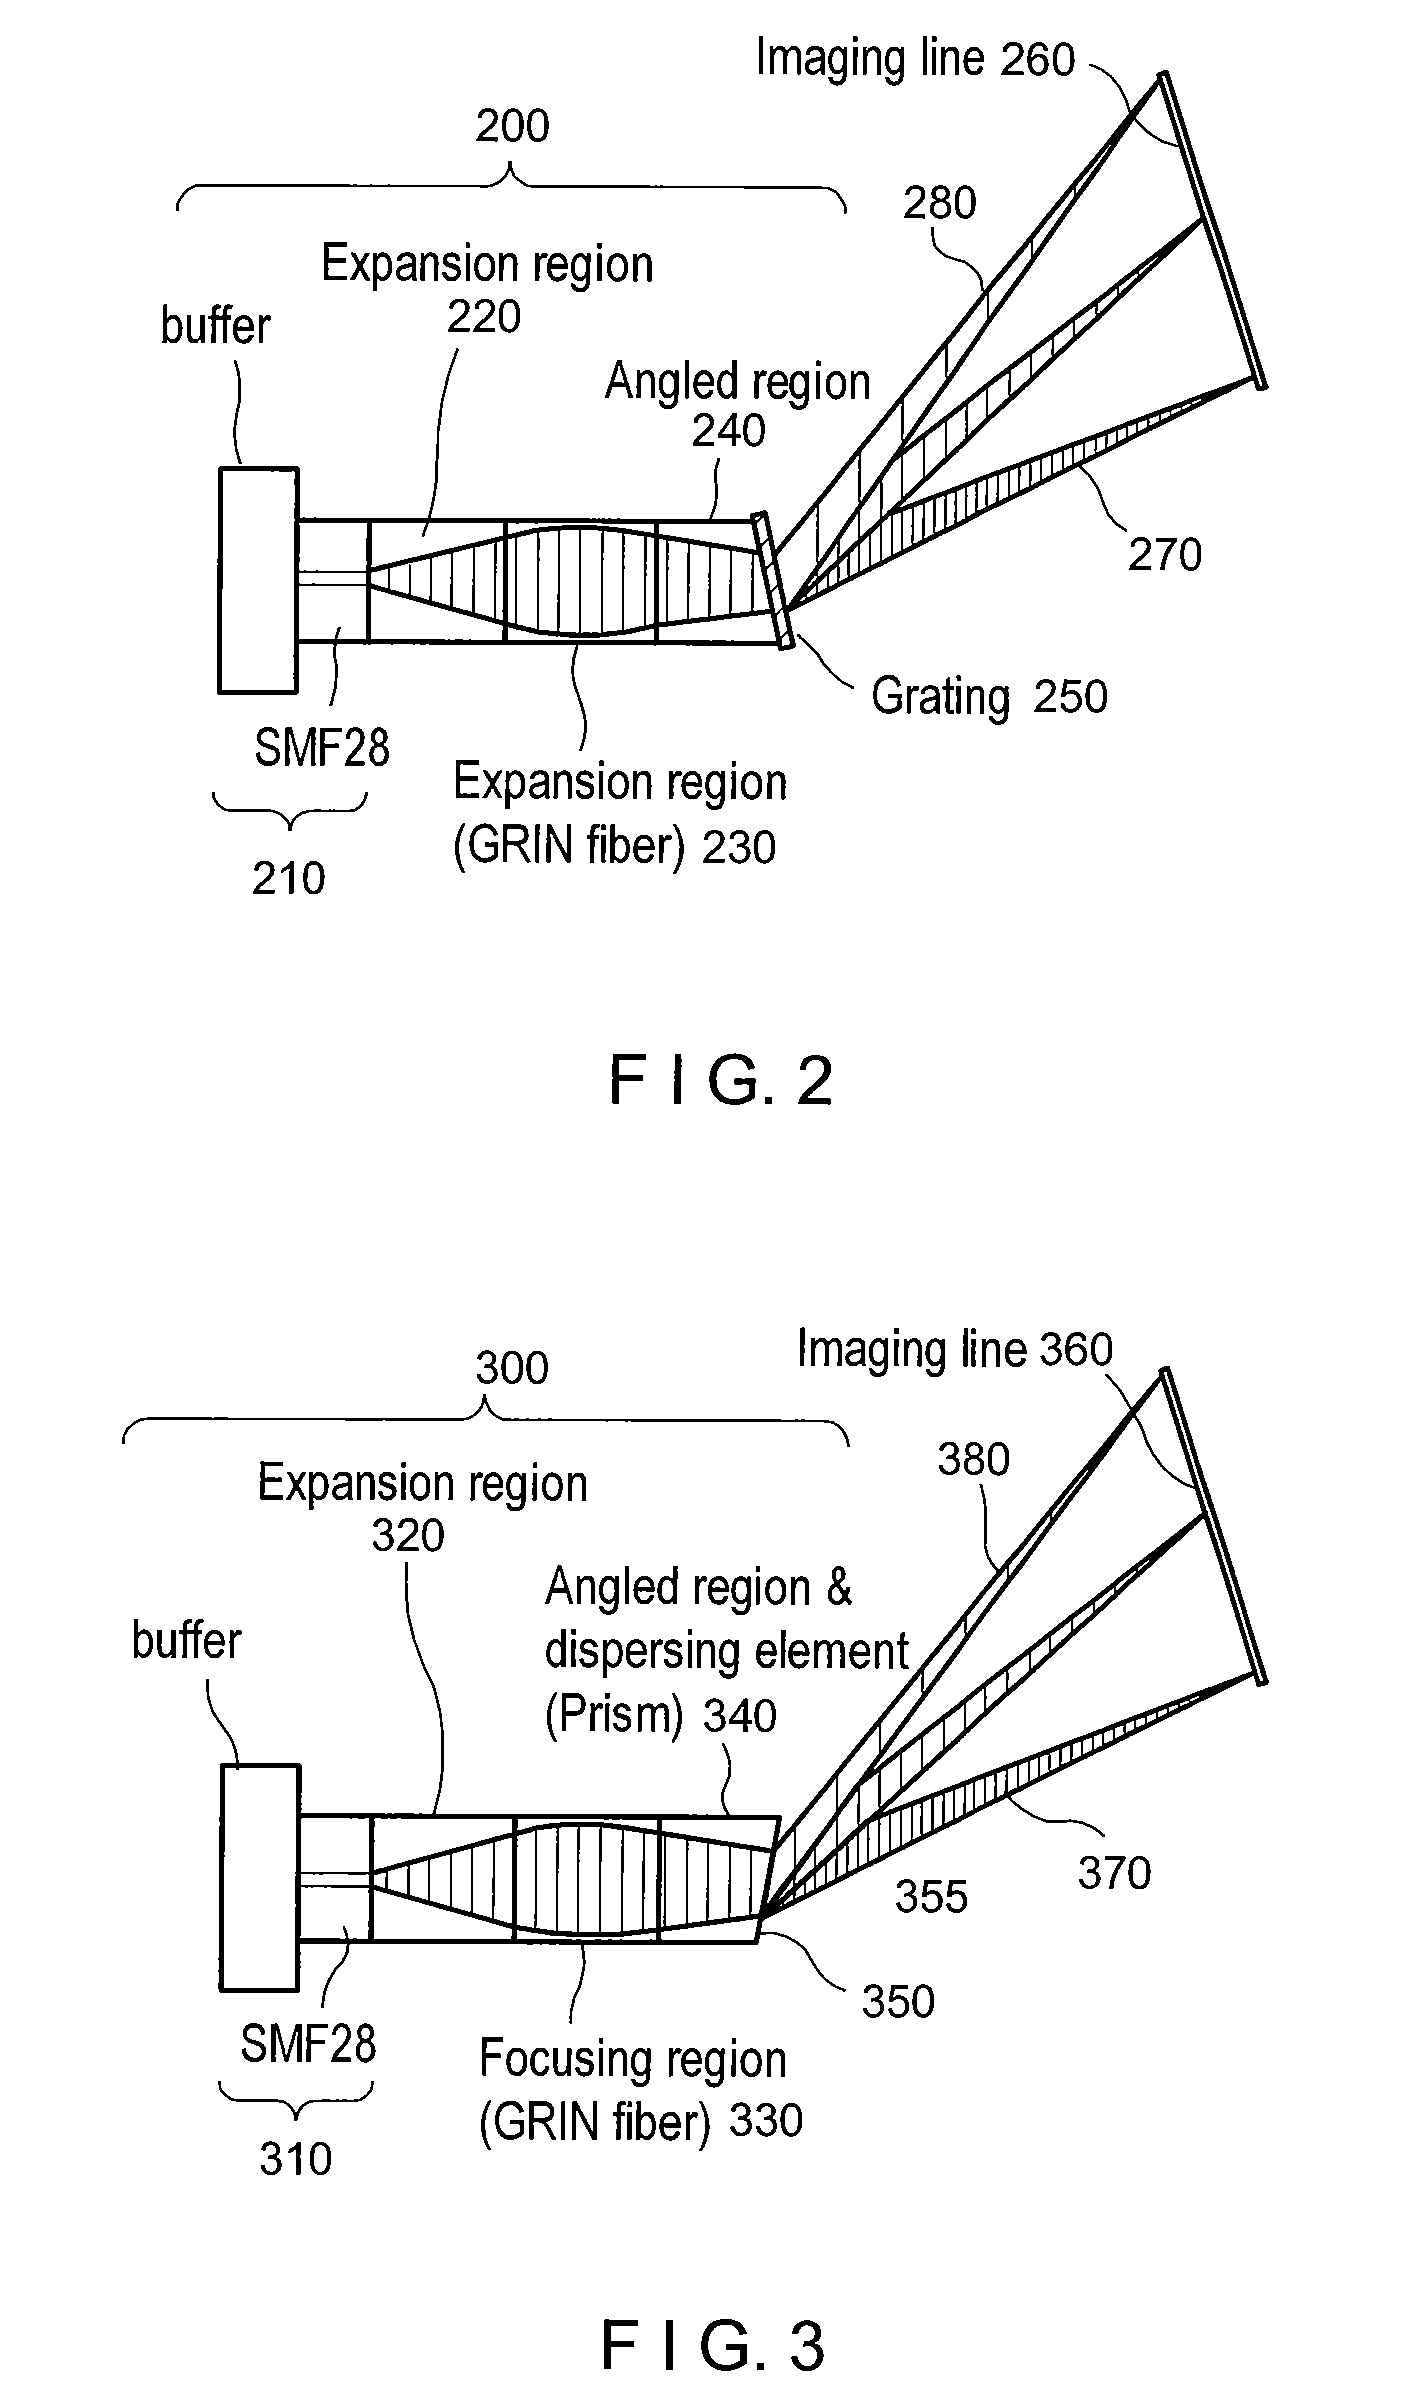 Apparatus for obtaining information for a structure using spectrally-encoded endoscopy techniques and methods for producing one or more optical arrangements